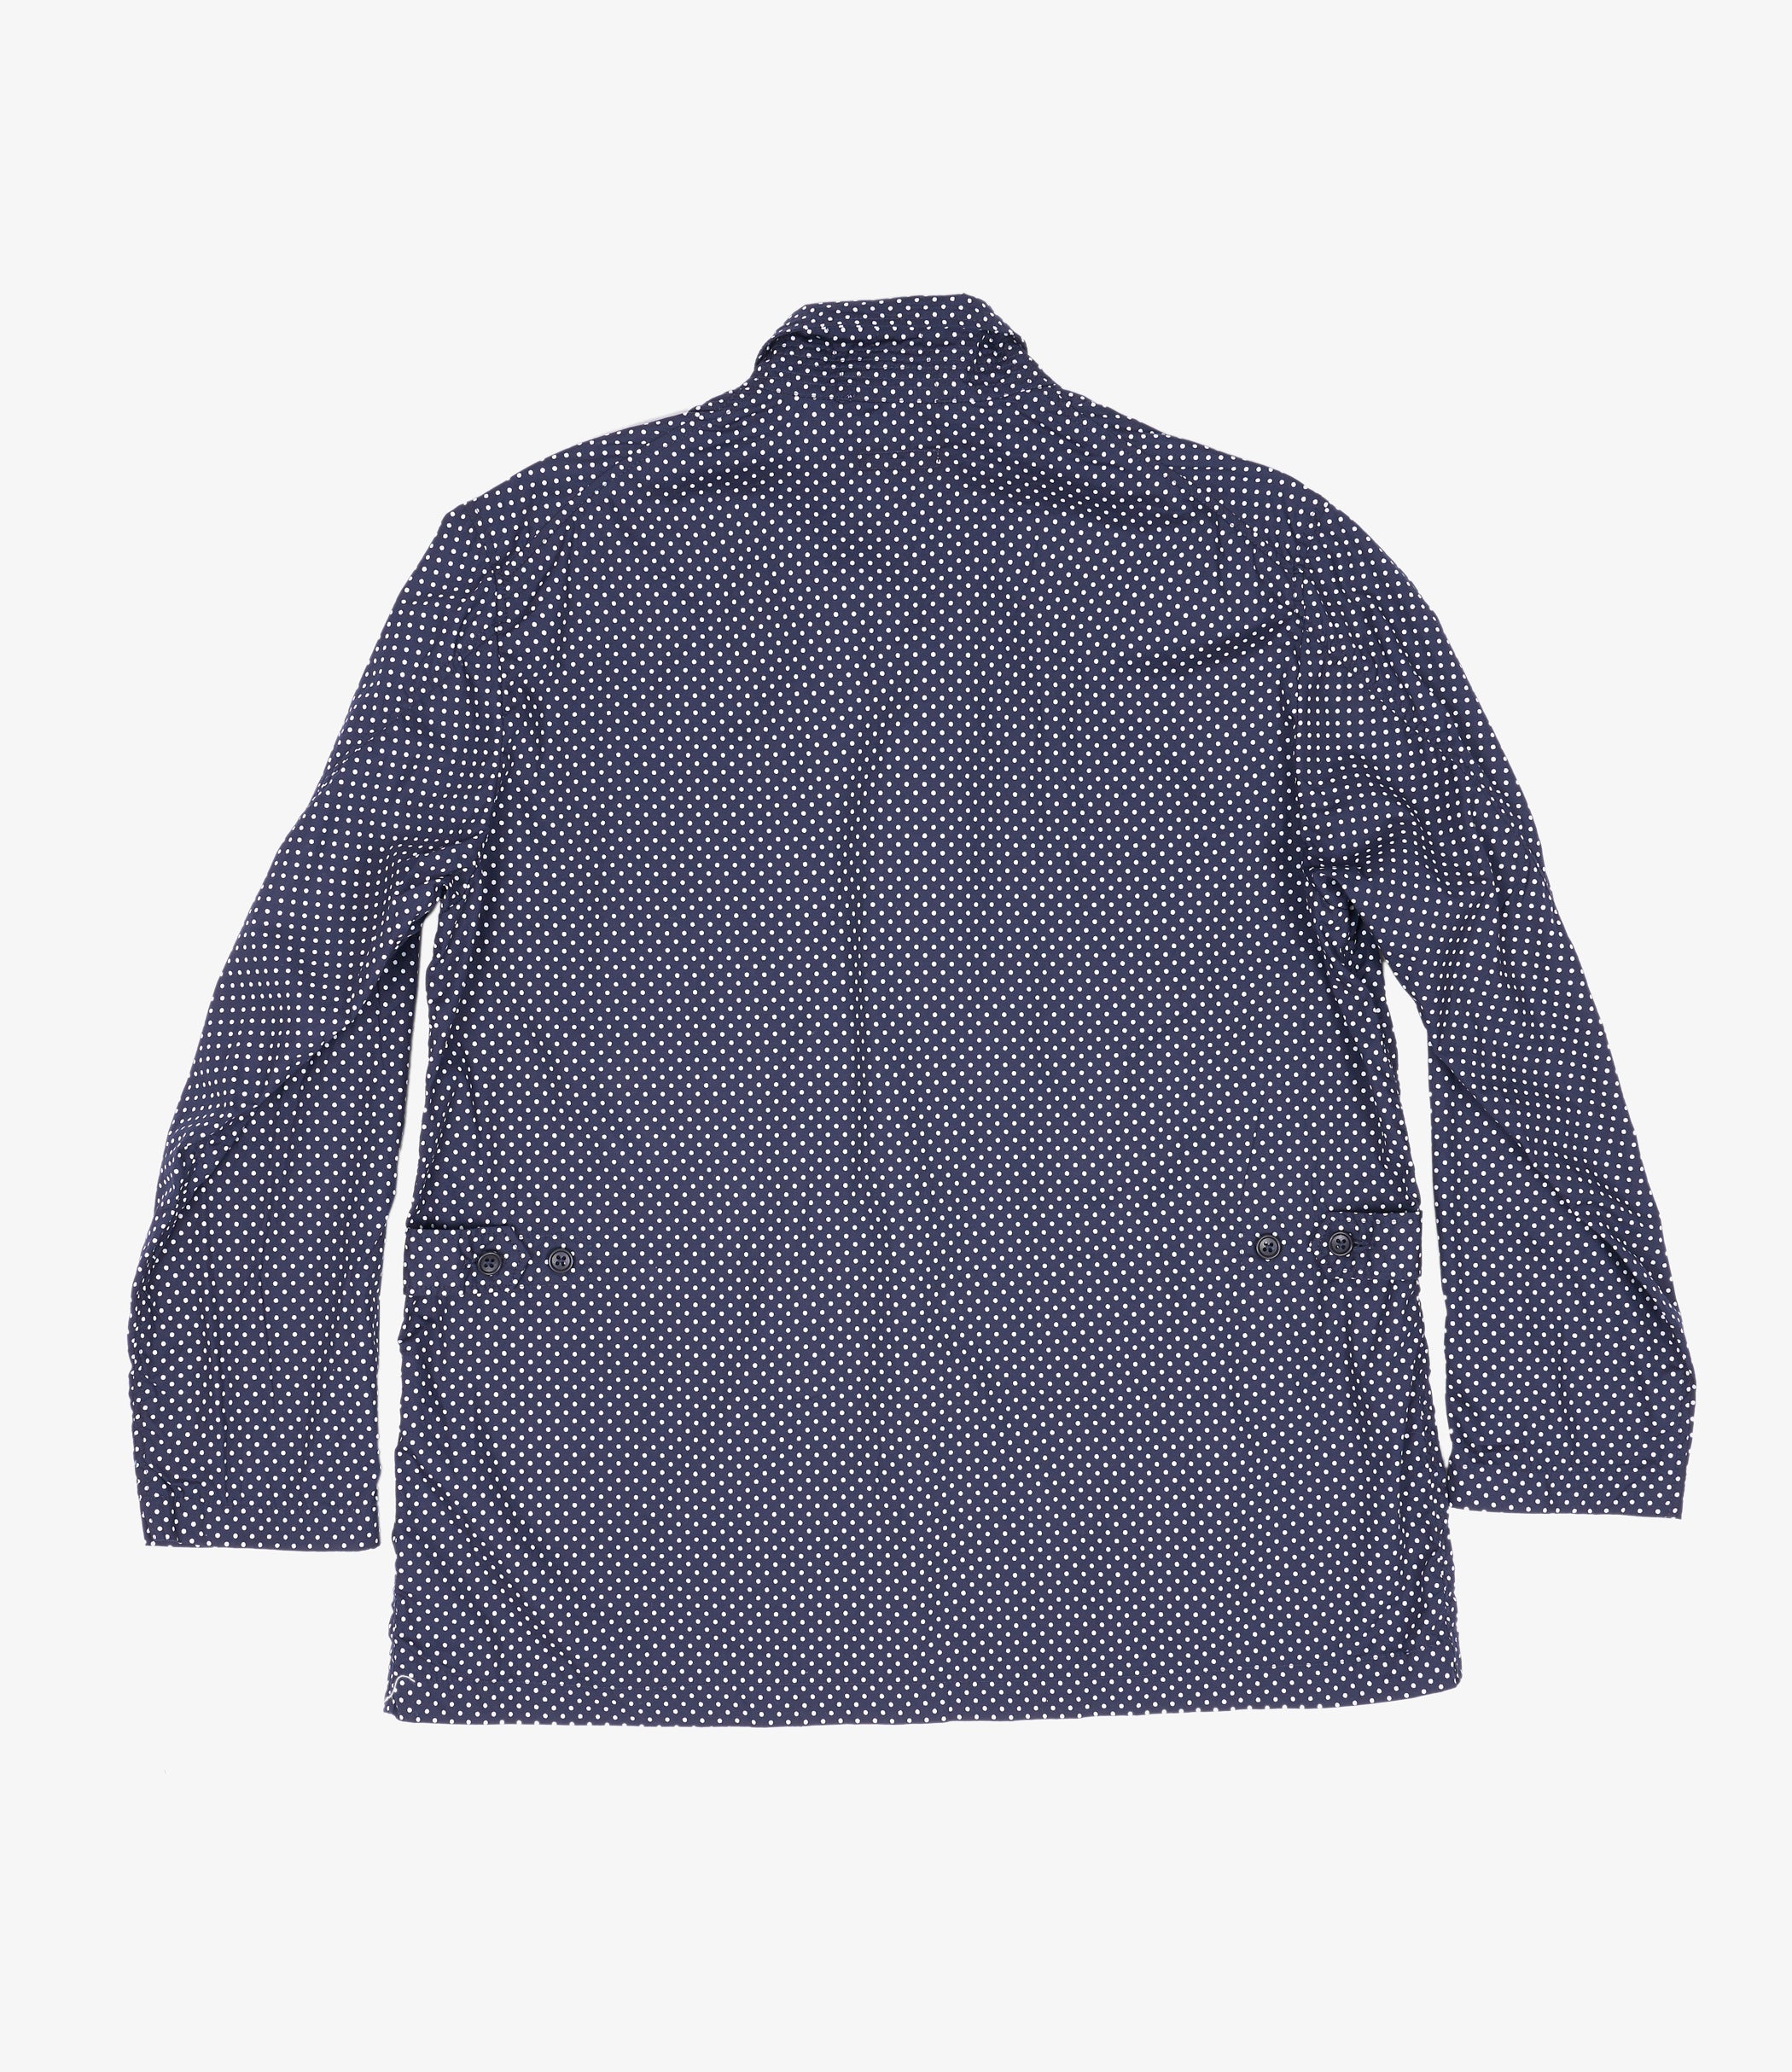 Nepenthes Special - Loiter Jacket - Navy Big PD Broadcloth